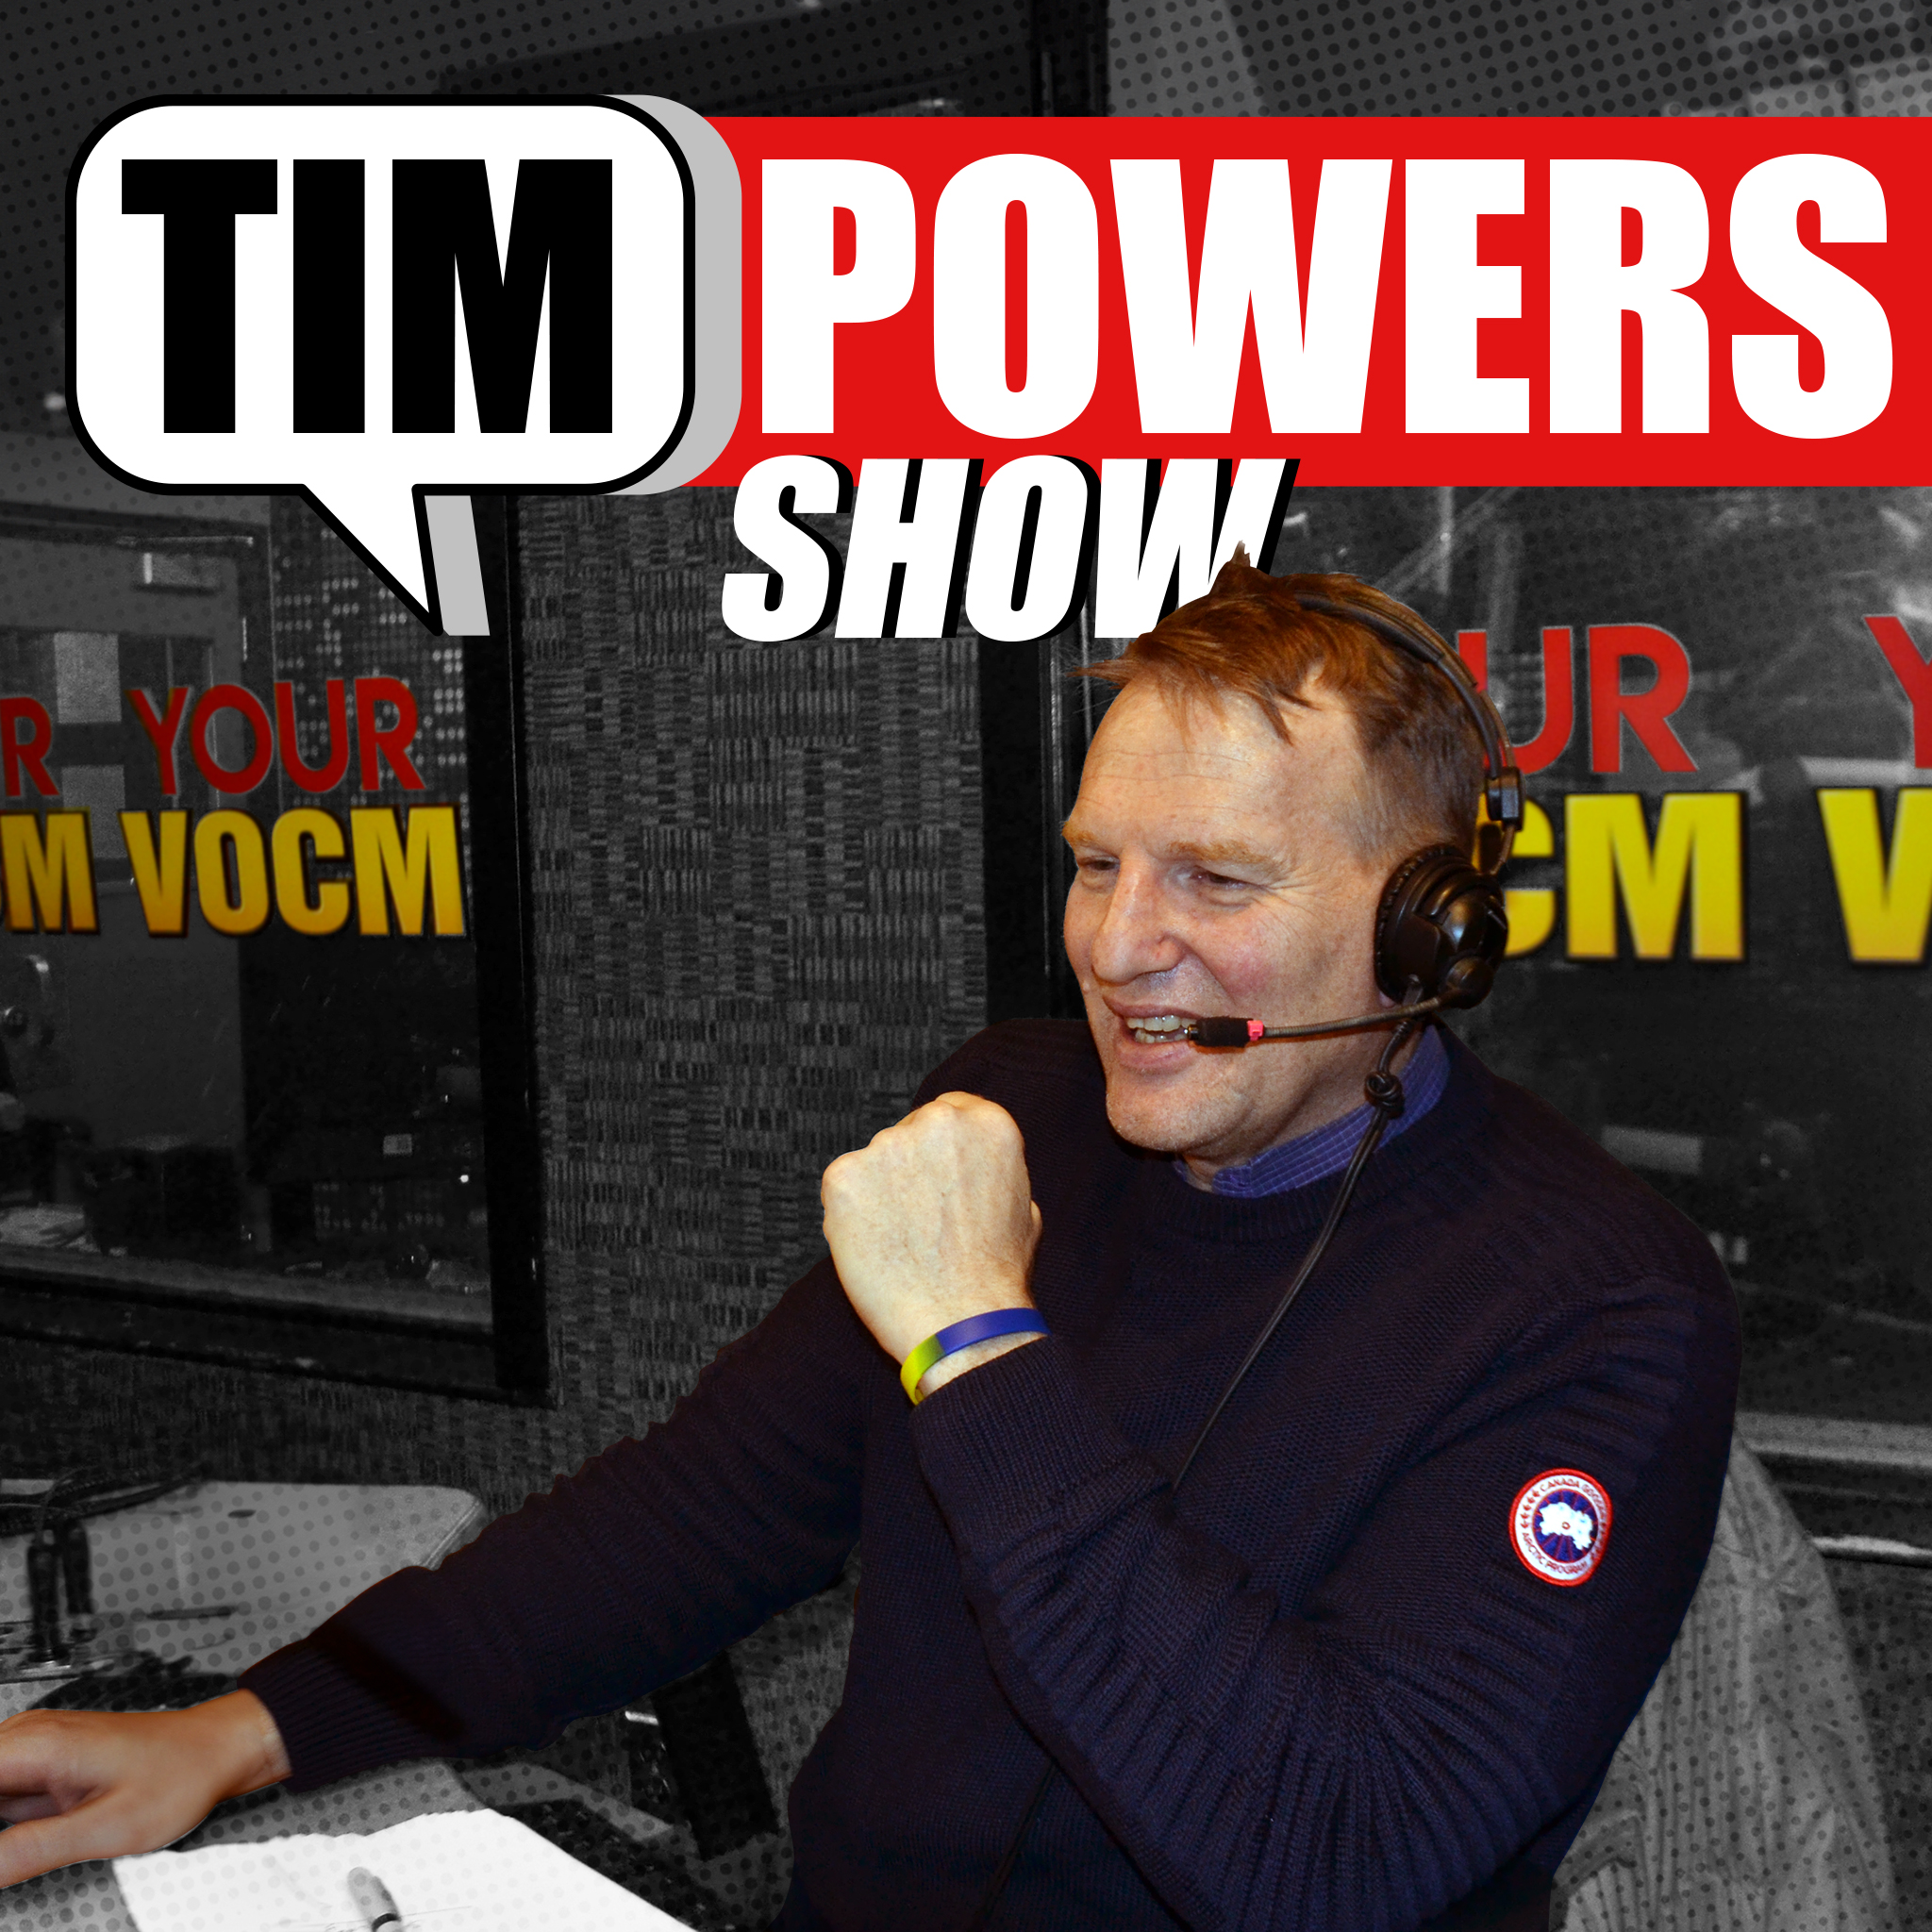 The Tim Powers Show, Wednesday May 22nd